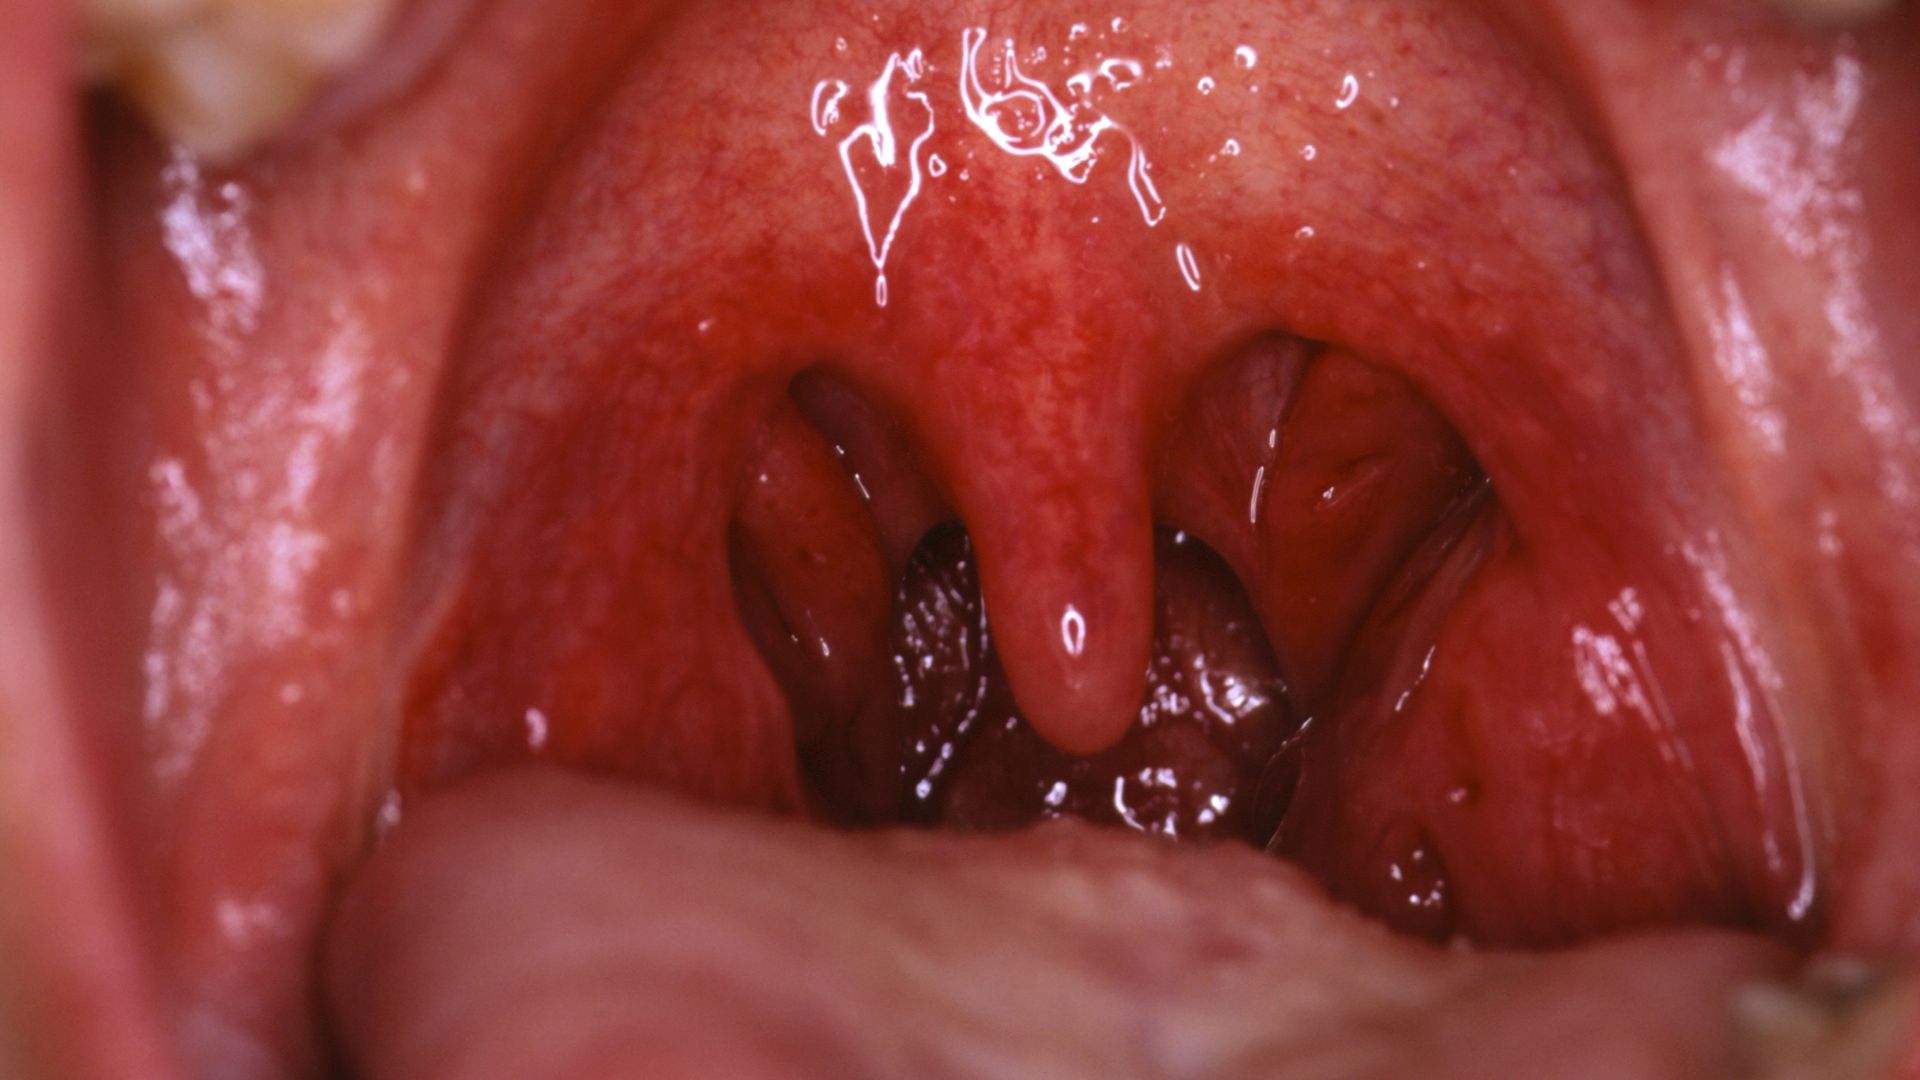 Inside View Of Mouth